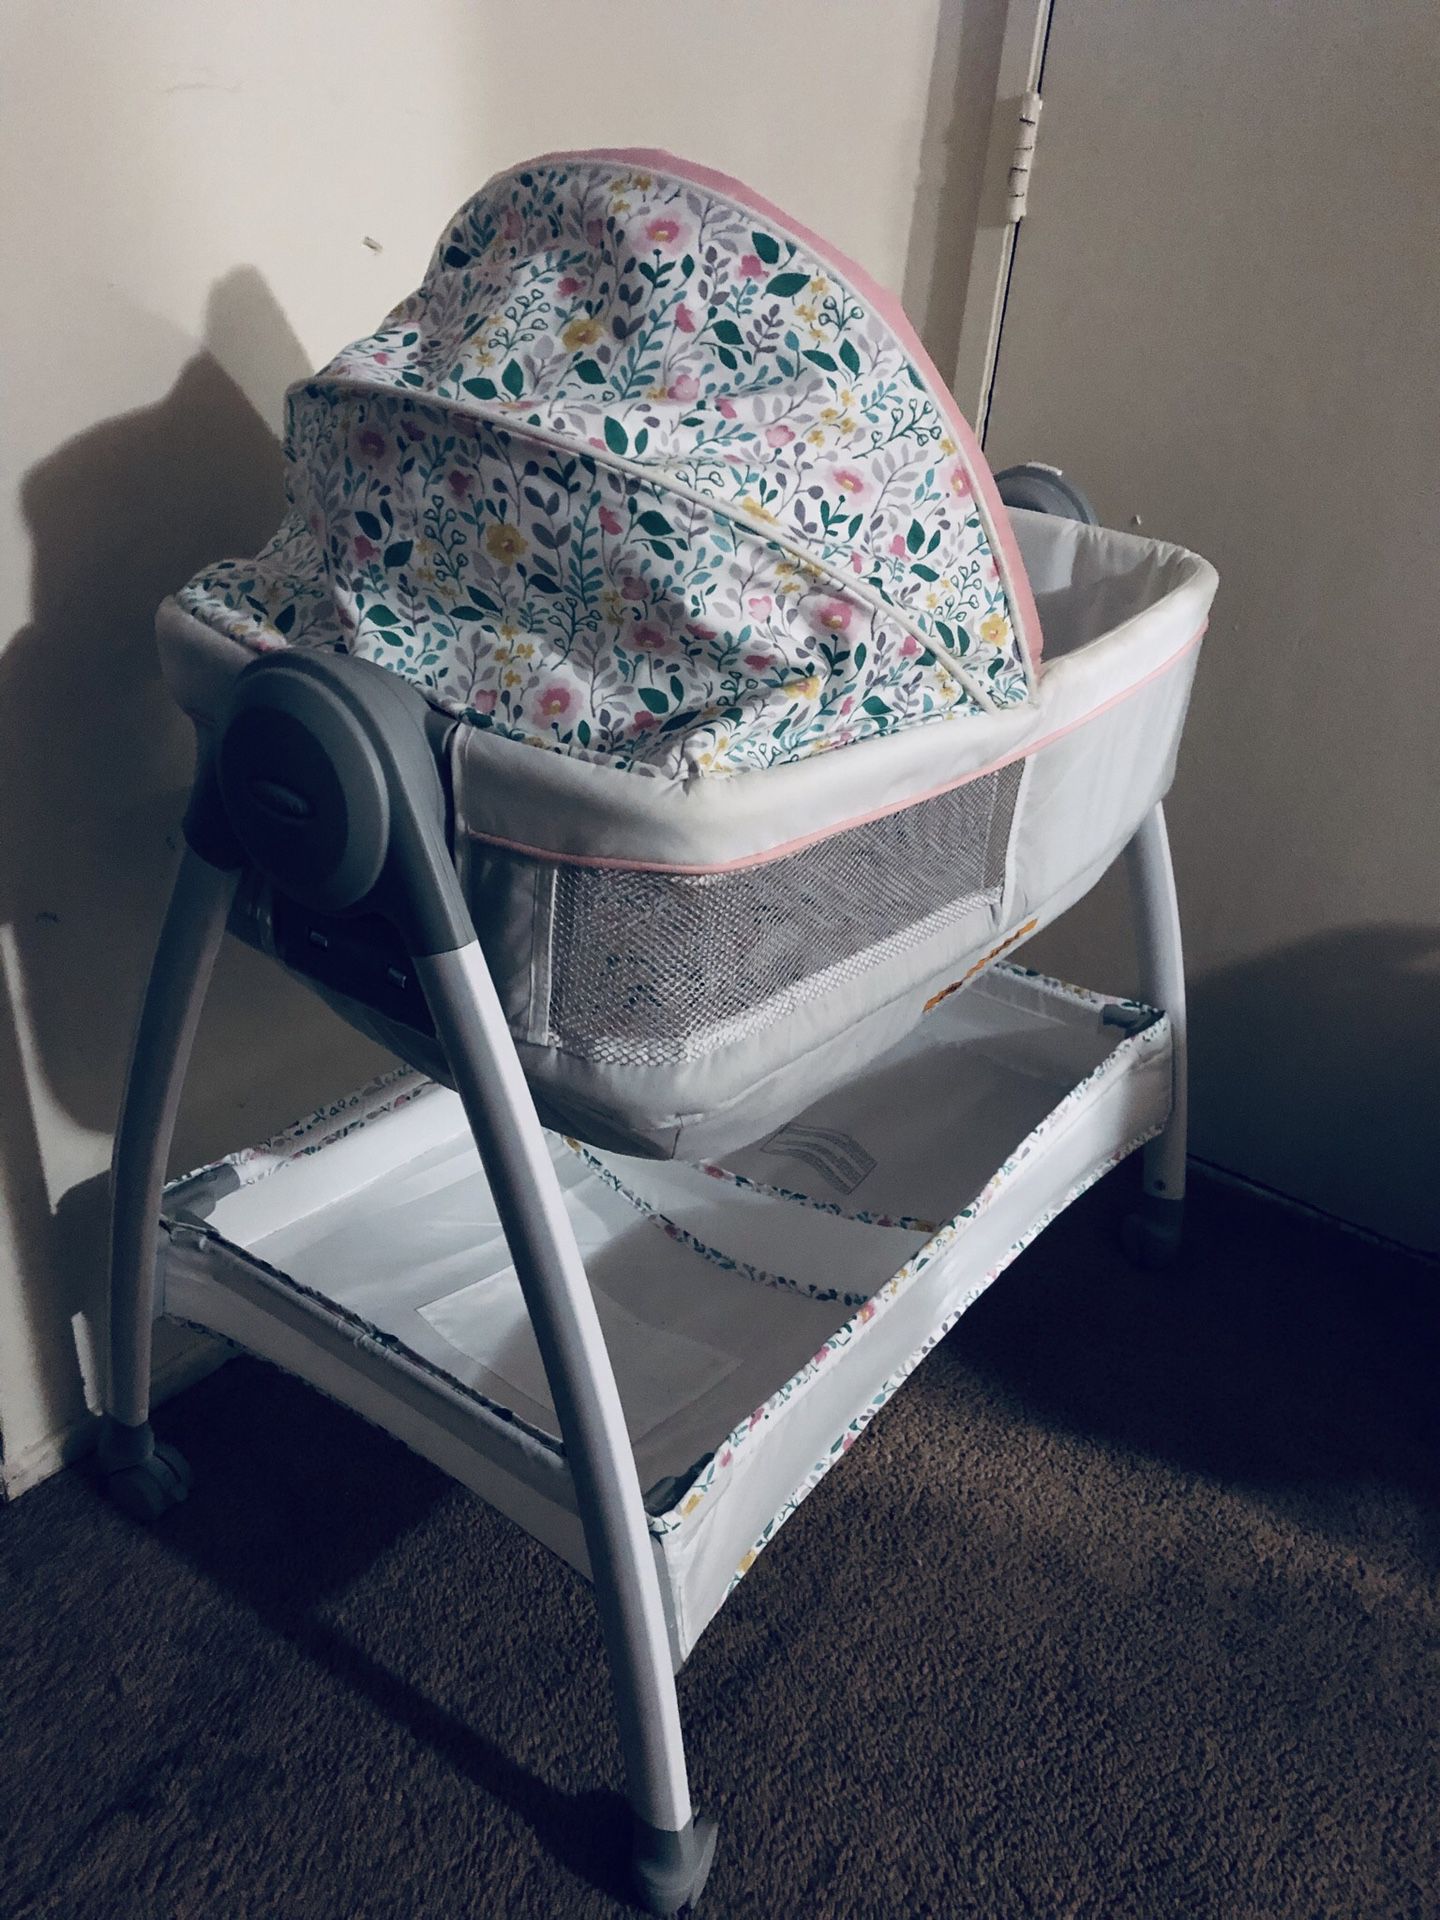 Bassinet/ Changing table for baby girl